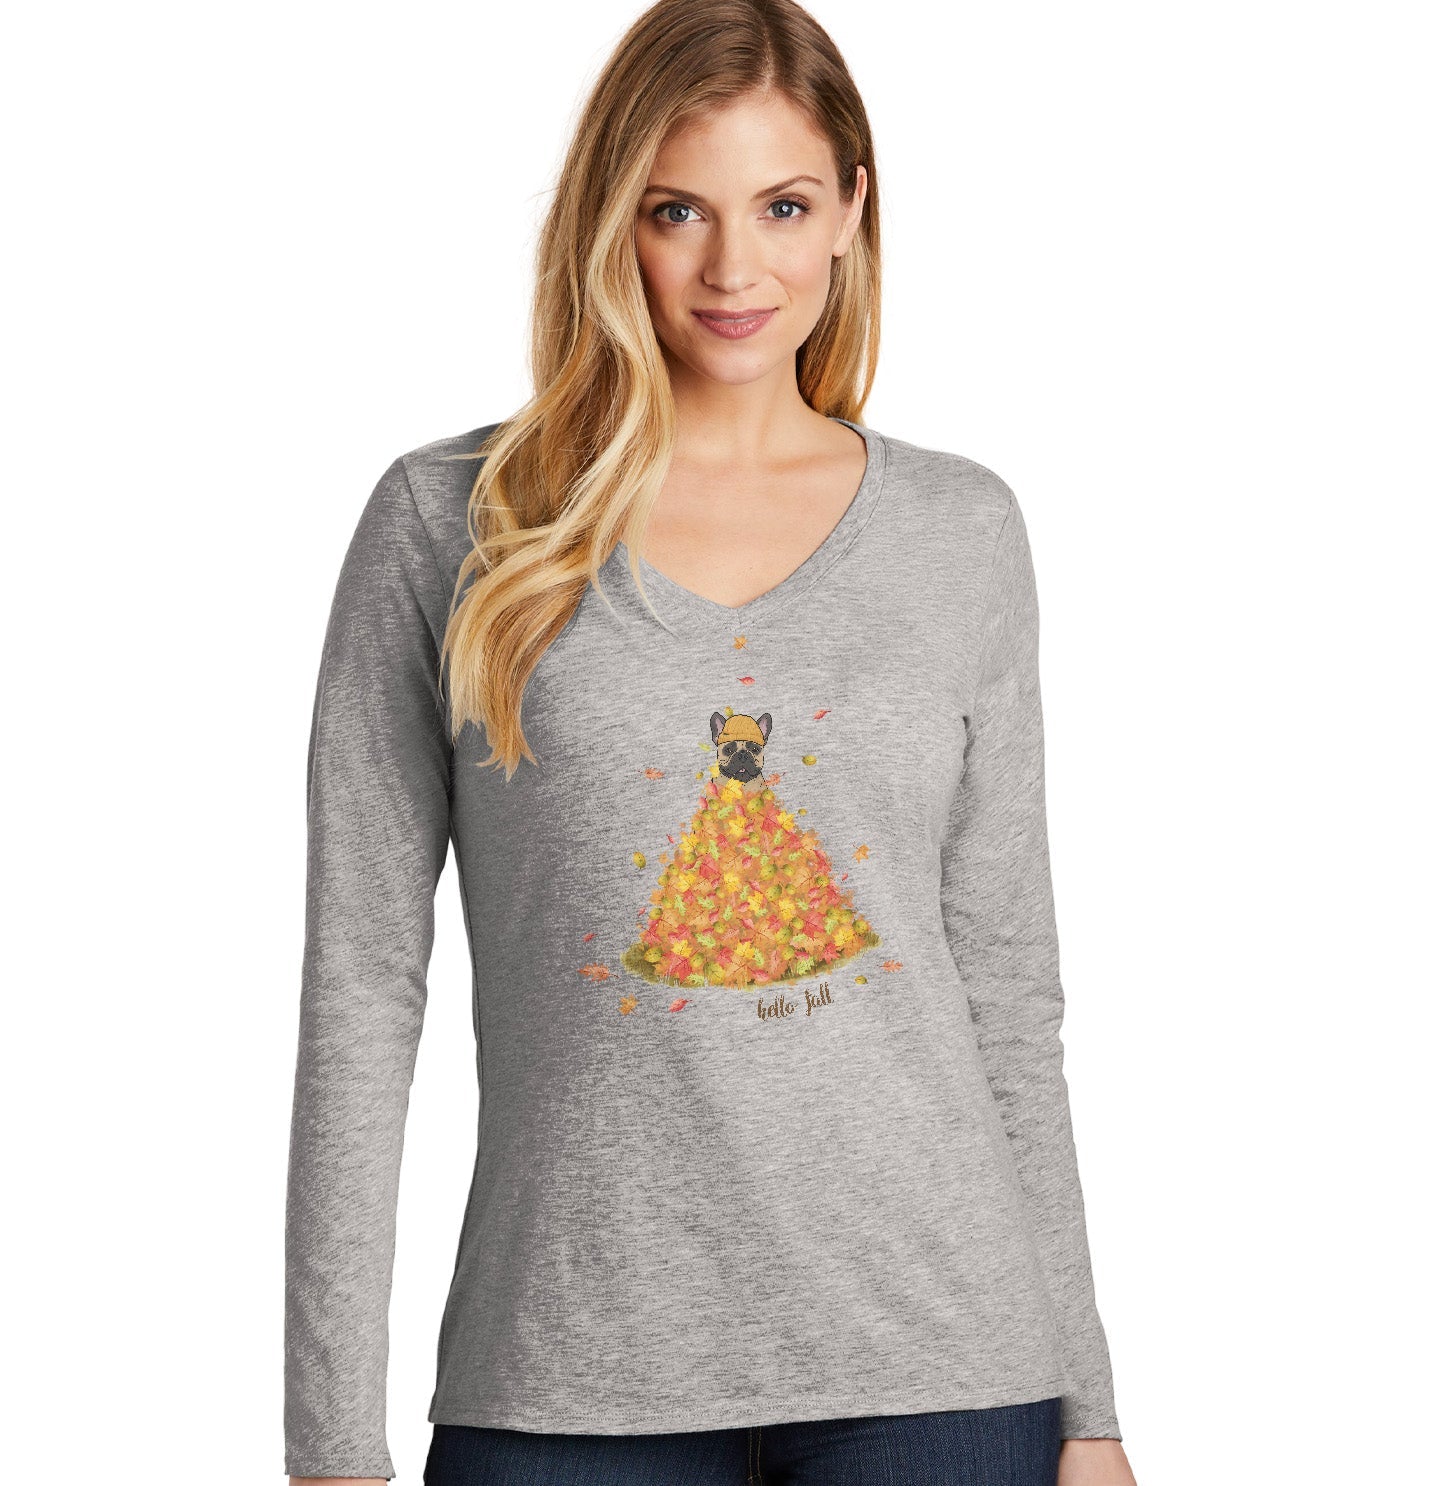 Leaf Pile and Frenchie - Women's V-Neck Long Sleeve T-Shirt